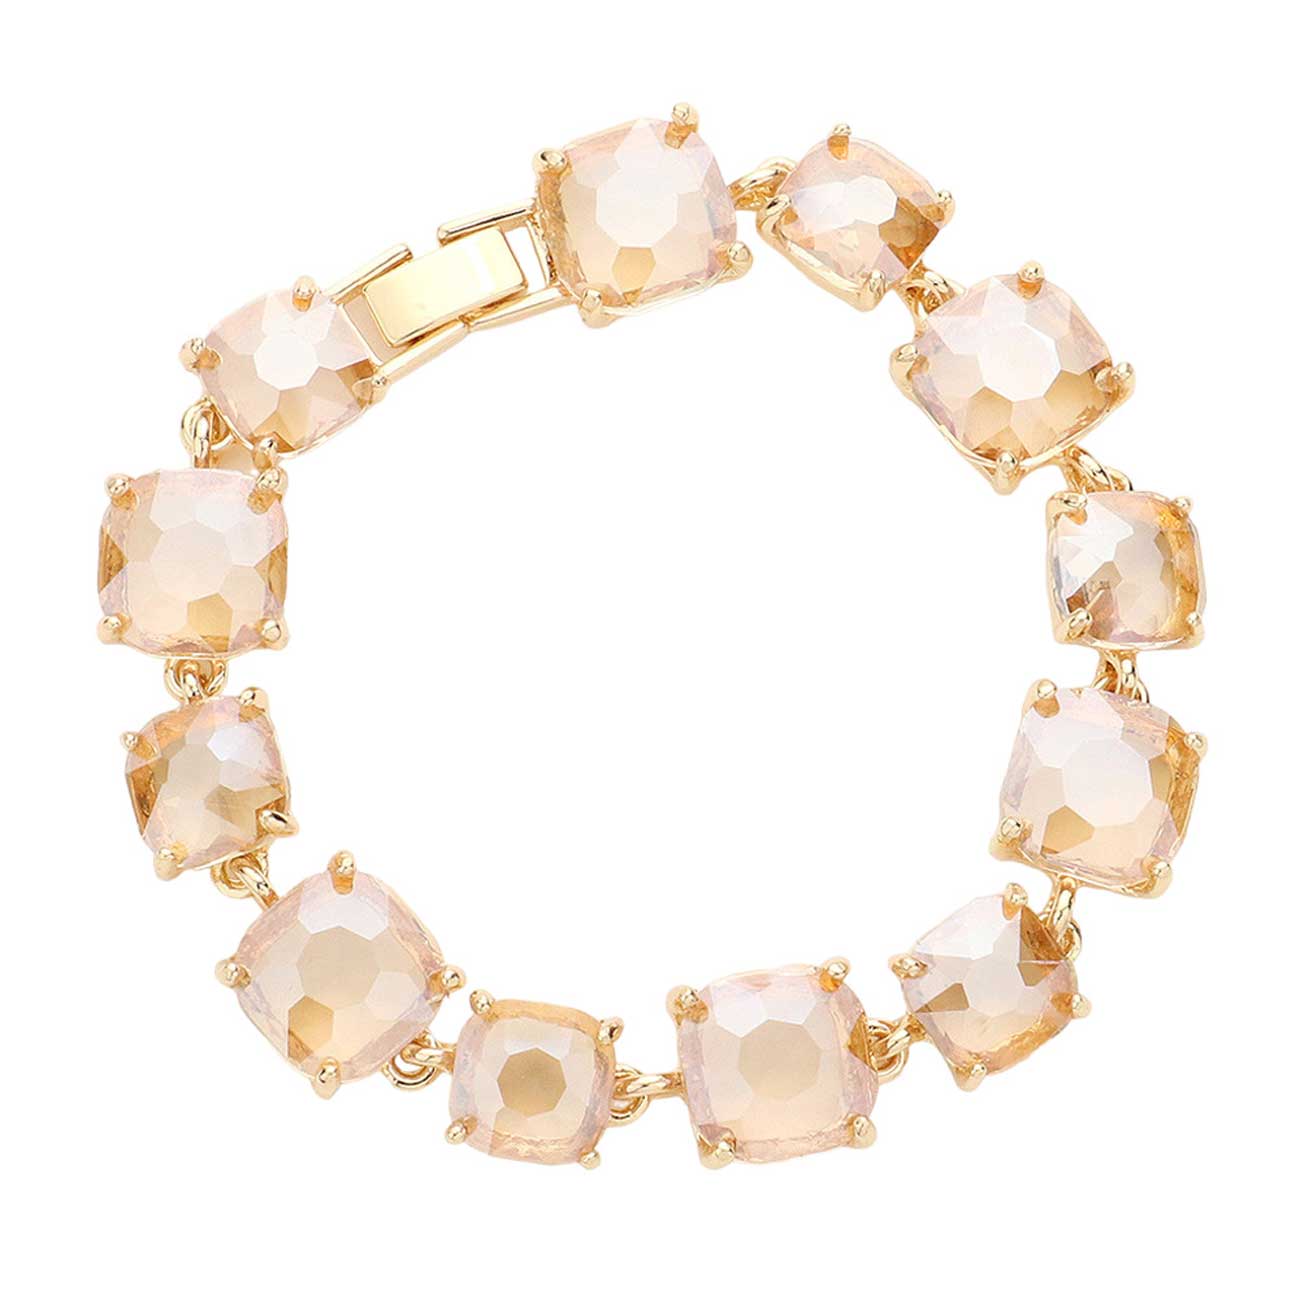 Taupe Cushion Square Stone Link Evening Bracelet, is the perfect accessory for any occasion. Crafted with a diamond-like cut and a gorgeous link pattern, this bracelet is sure to turn heads. This unique design is sure to make look stylish. Crafted with attention to detail, this bracelet will add a touch of glamour to attire.